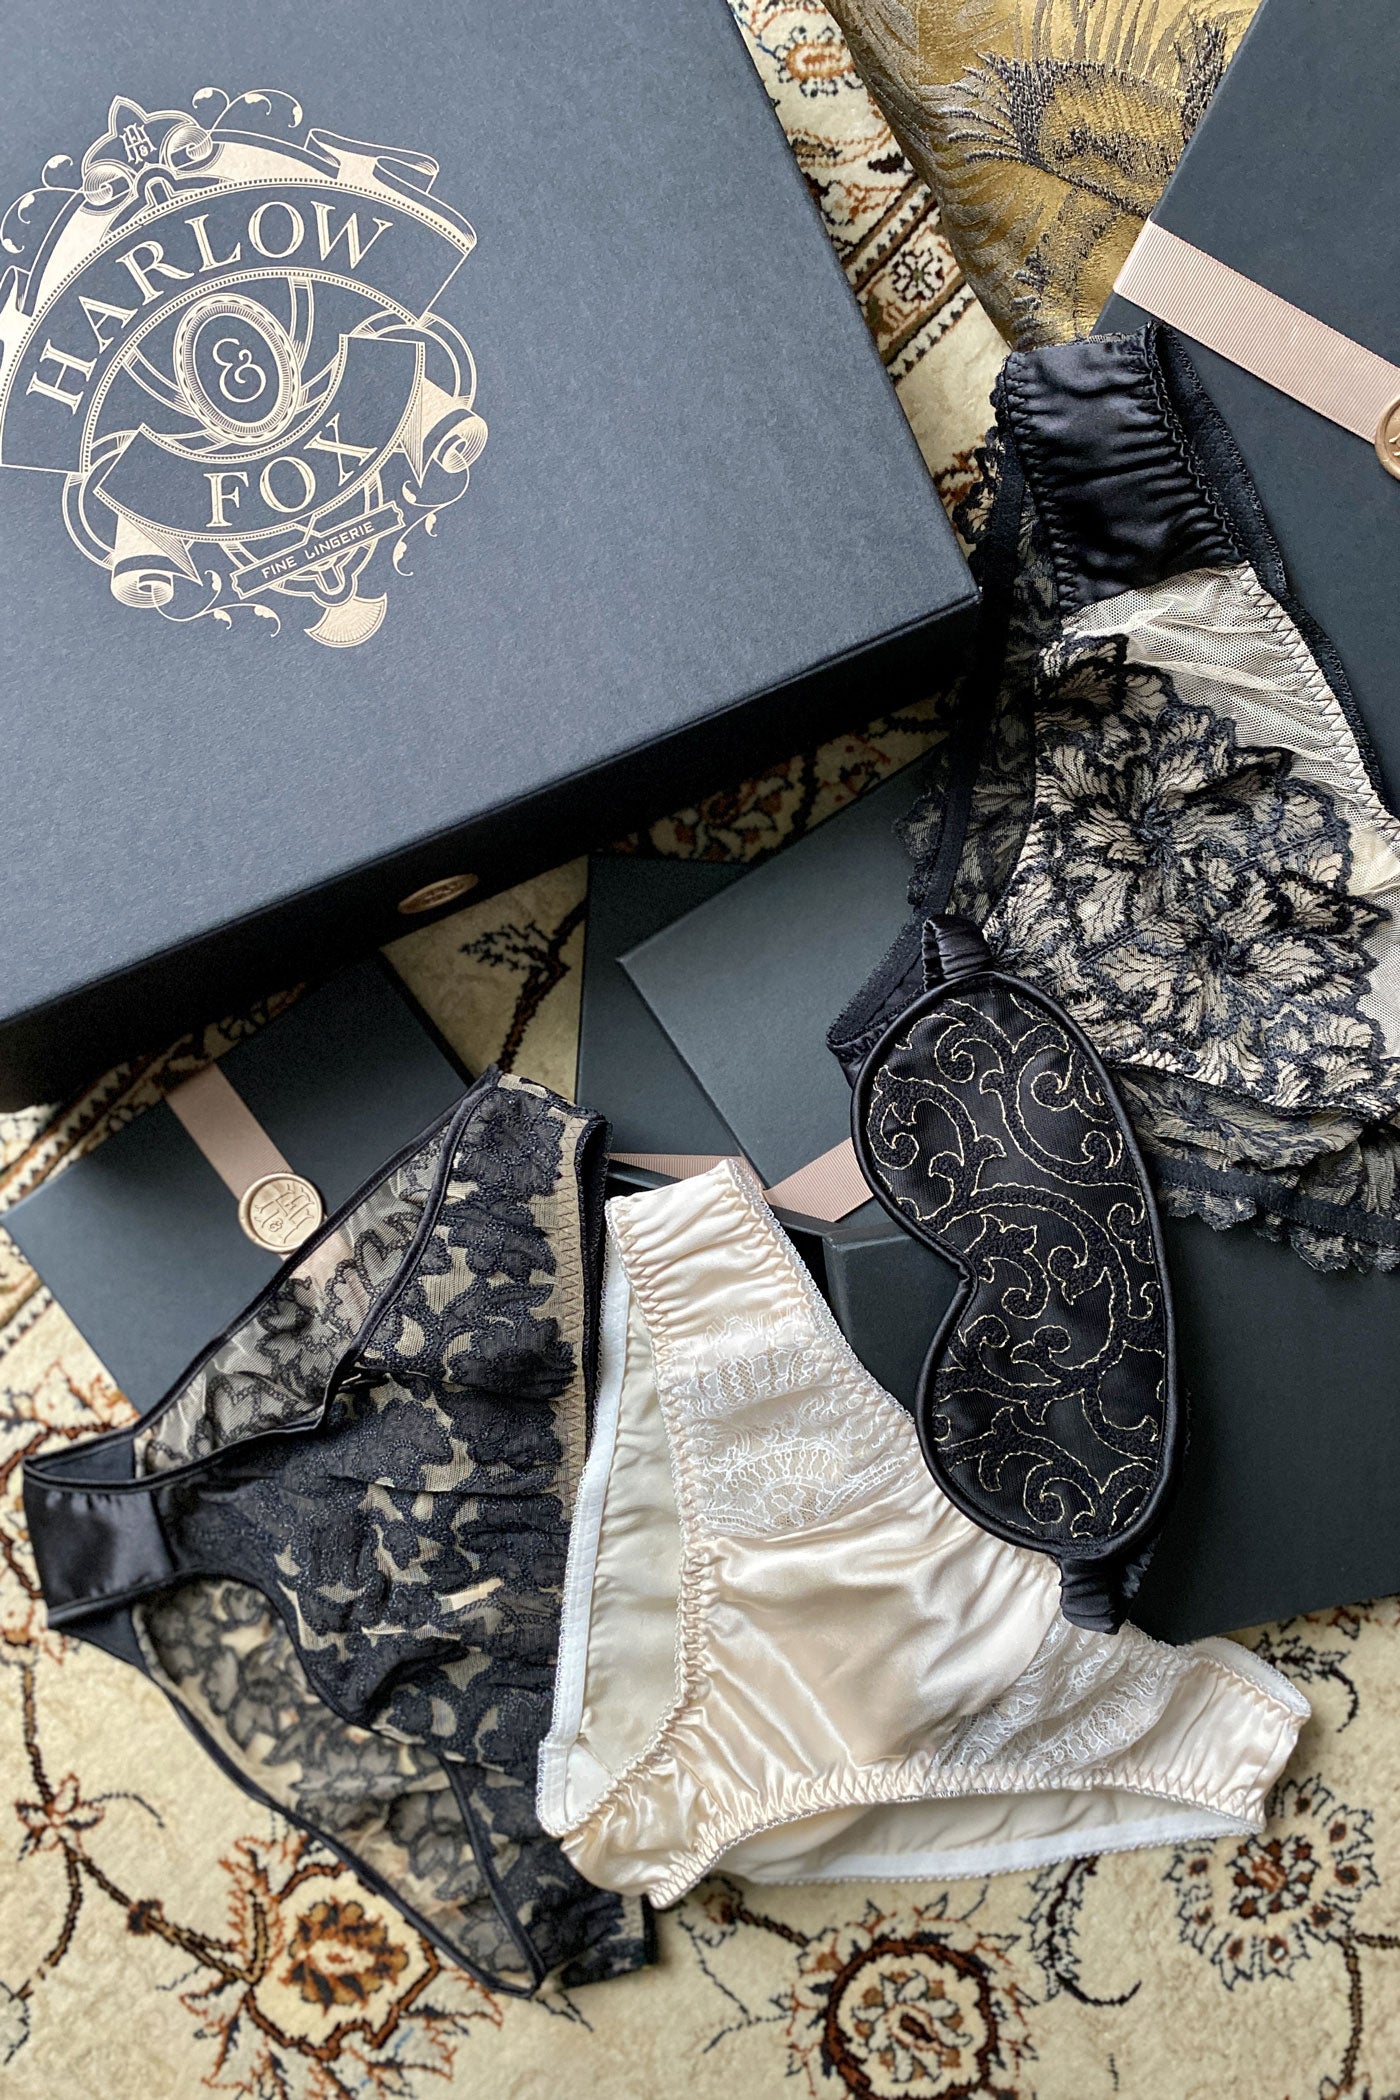 Luxury lingerie gift box set with silk and lace knicker and embroidered eye mask